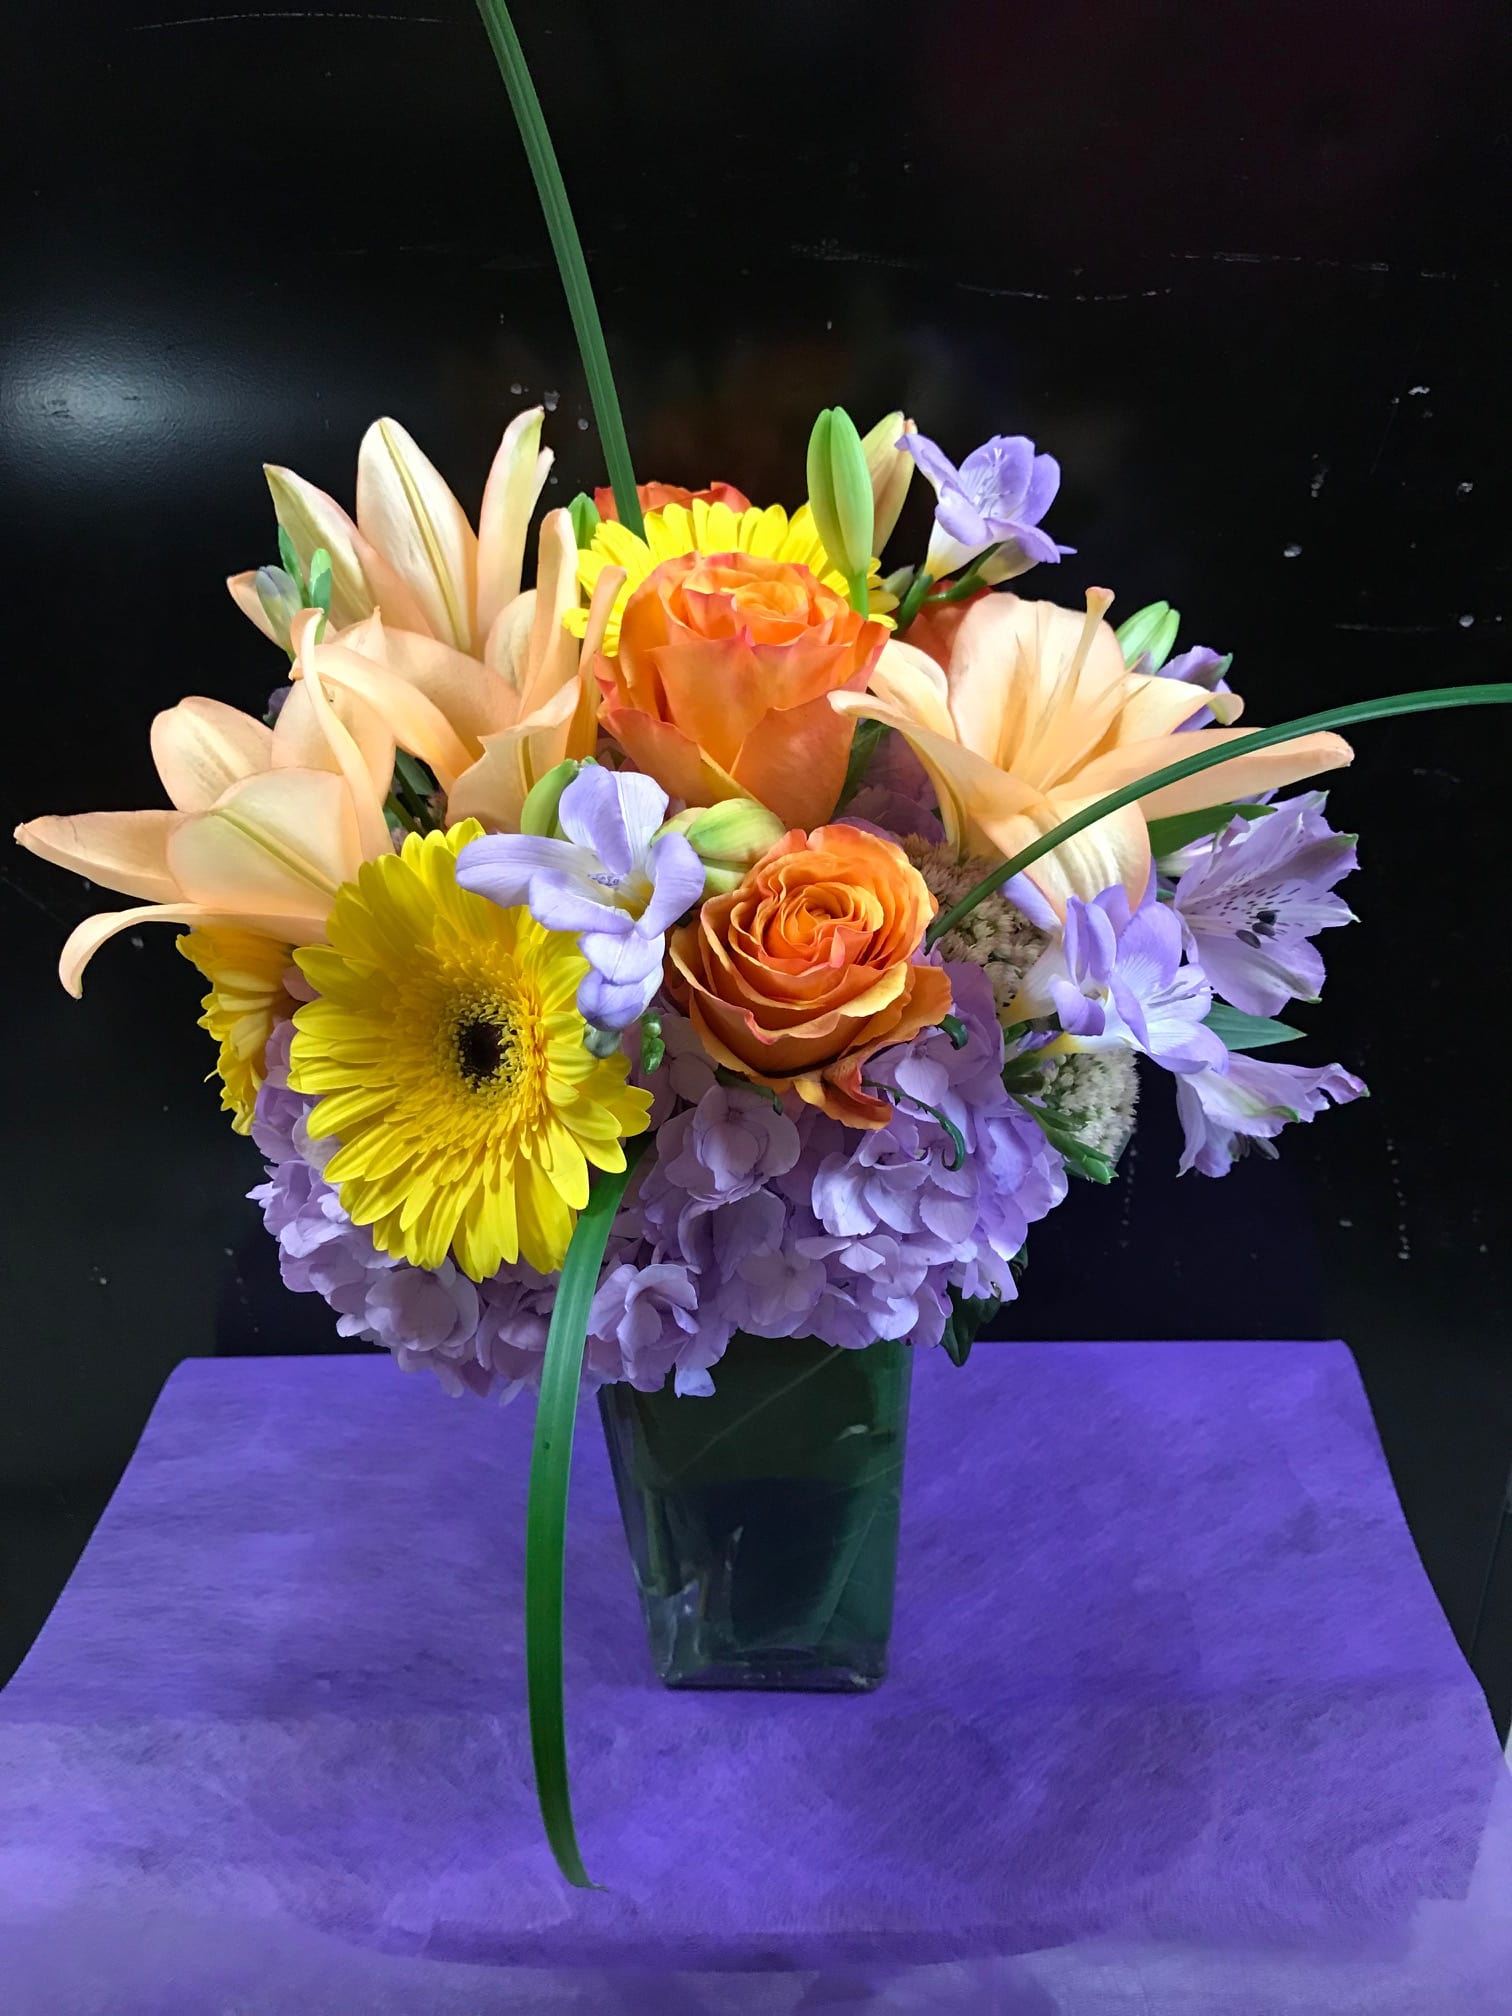 Brighter Days Ahead - Soft and cheerful arrangement sure to brighten anyone's day. Soft purple flowers accented with bright colored daisies, roses, and lilies. 